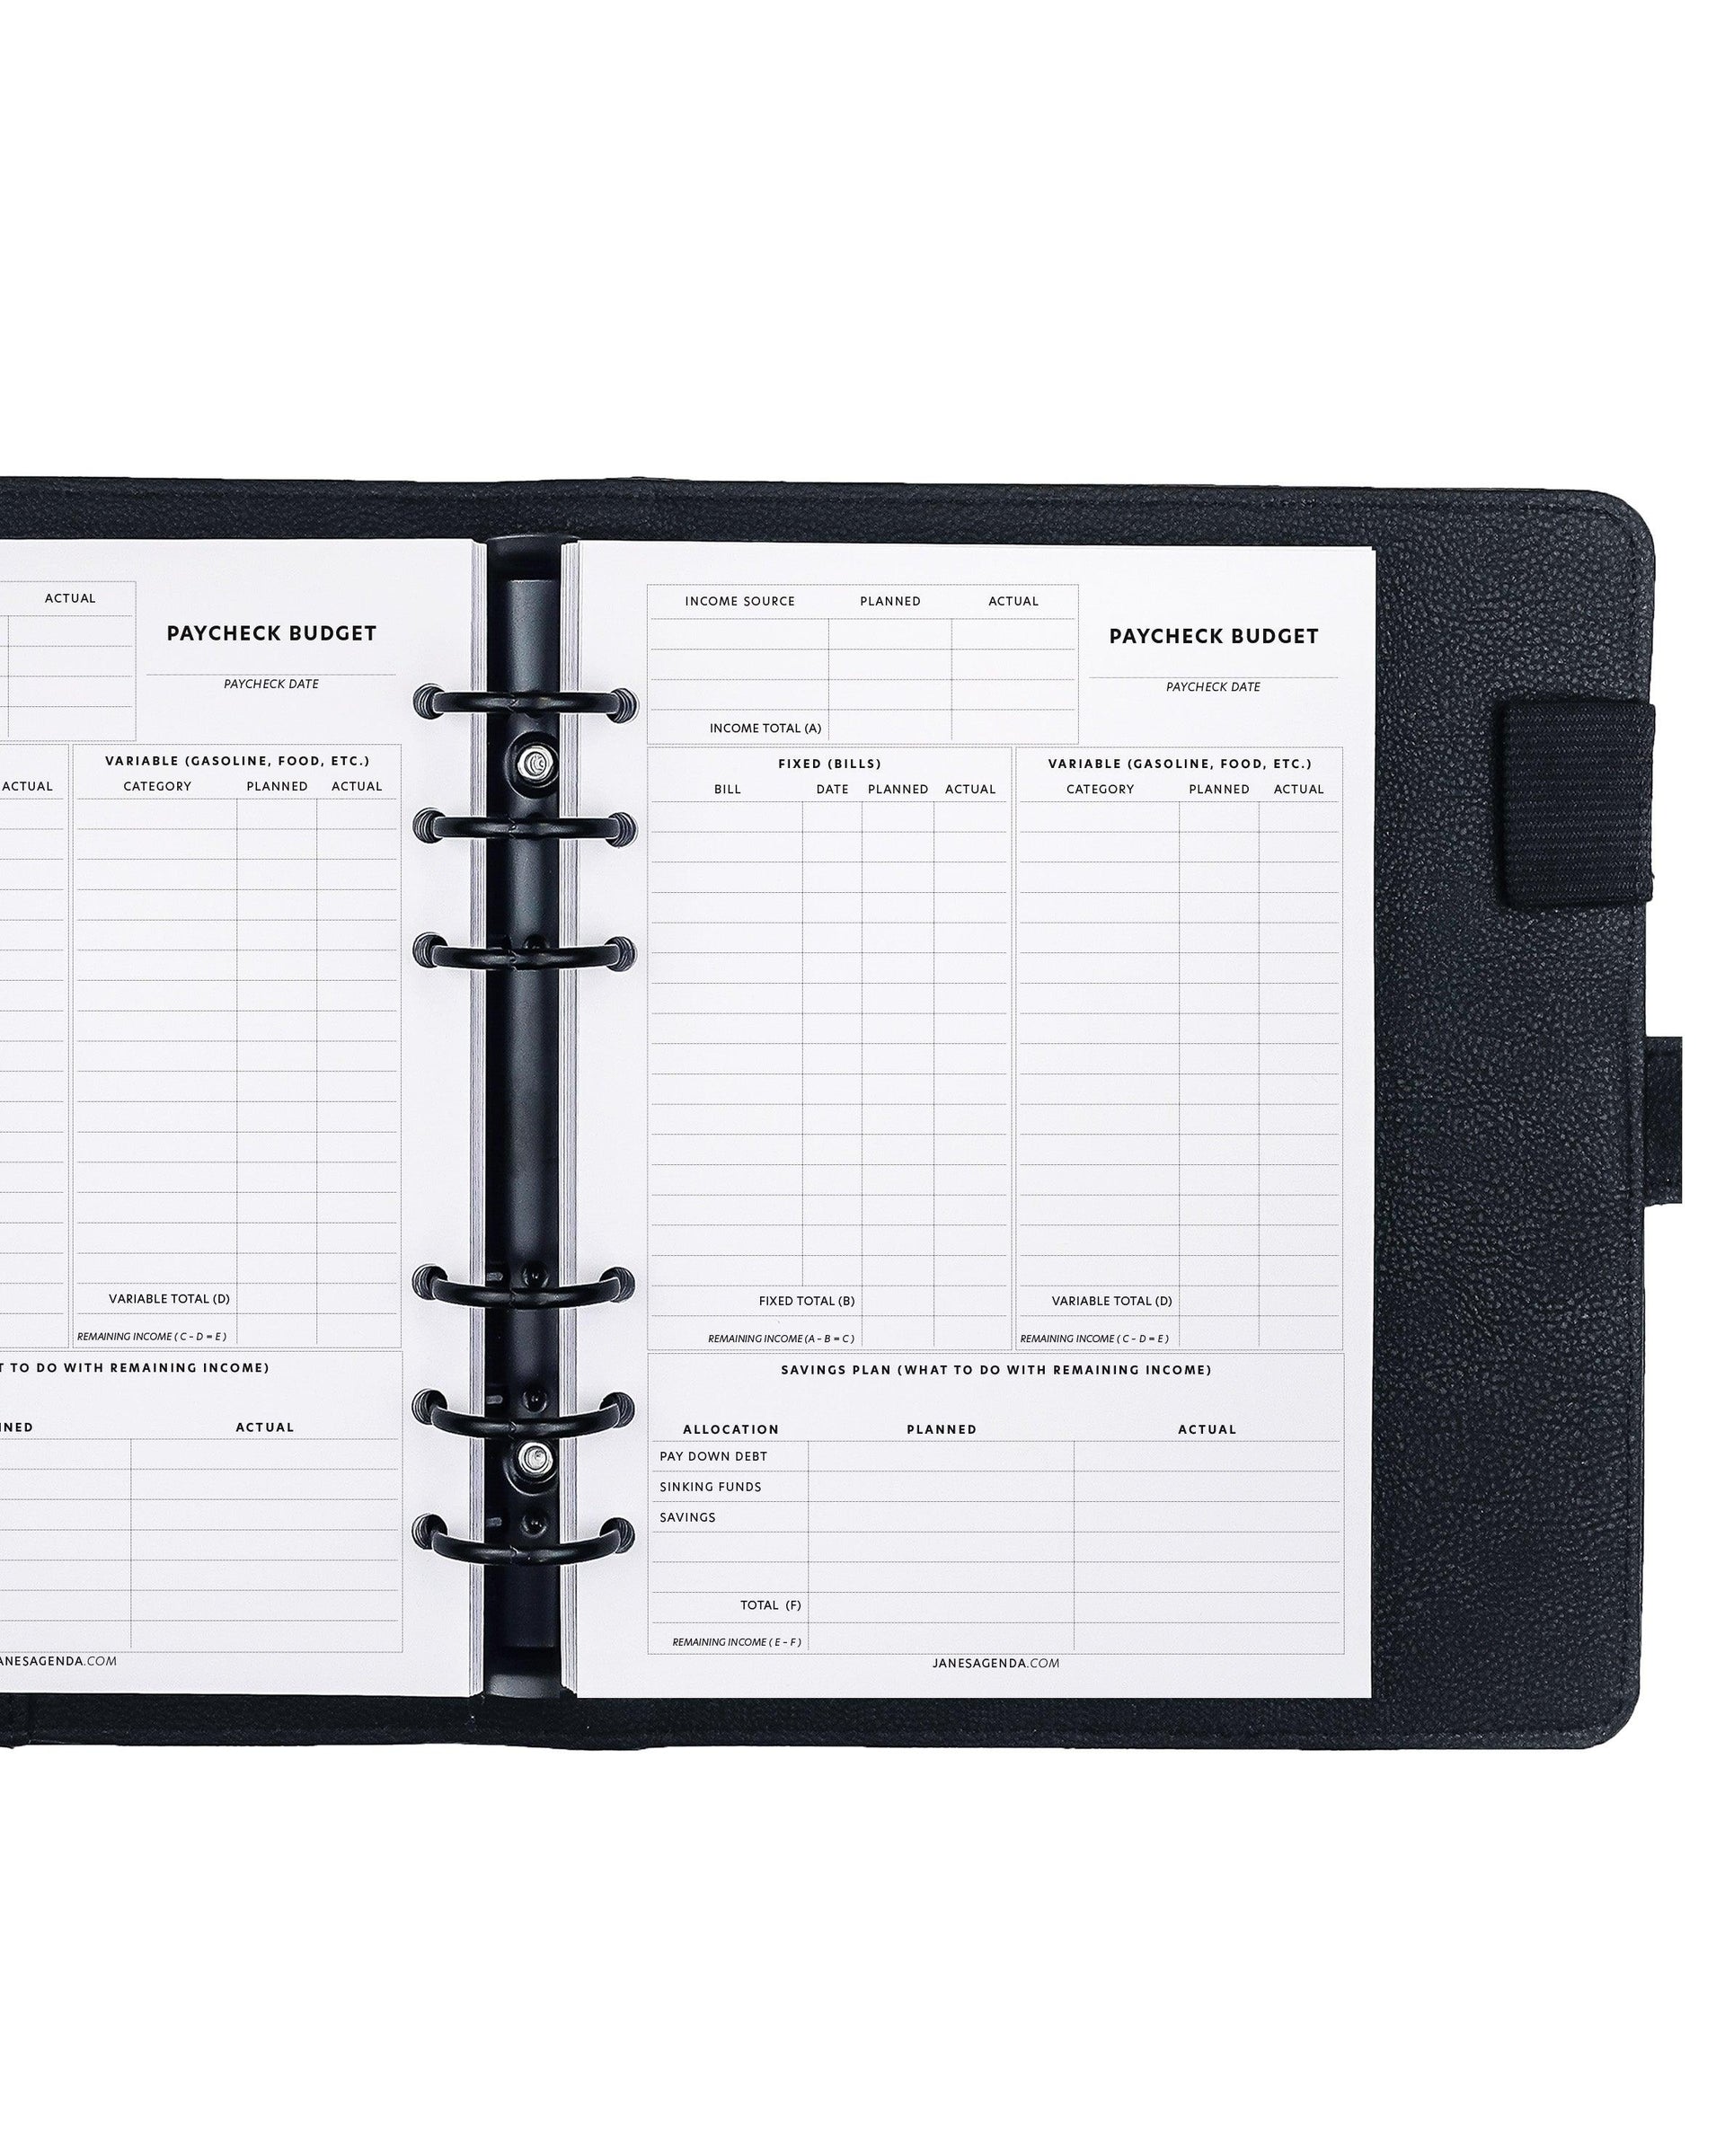 Paycheck budget planner inserts for discbound and six ring planner systems by Janes Agenda.